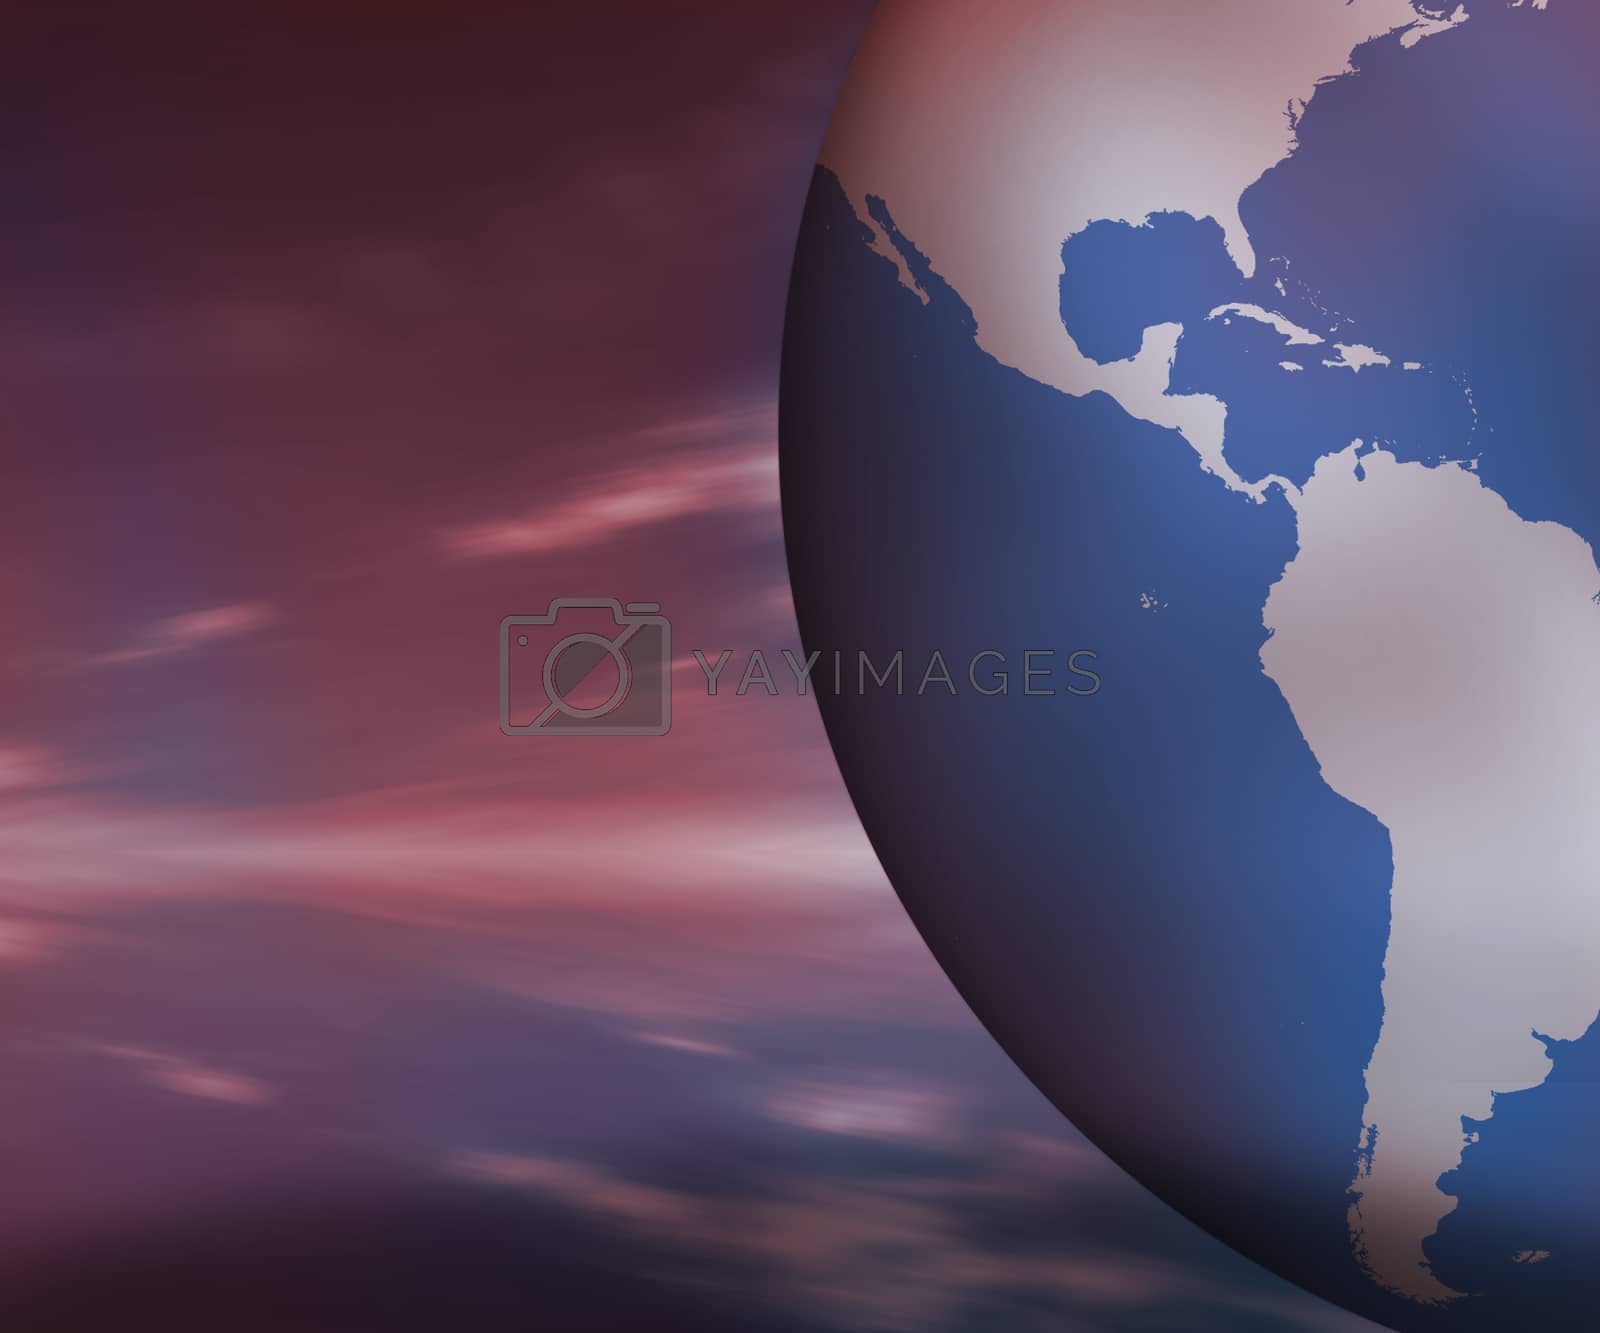 Royalty free image of North and South America on globe by Wavebreakmedia